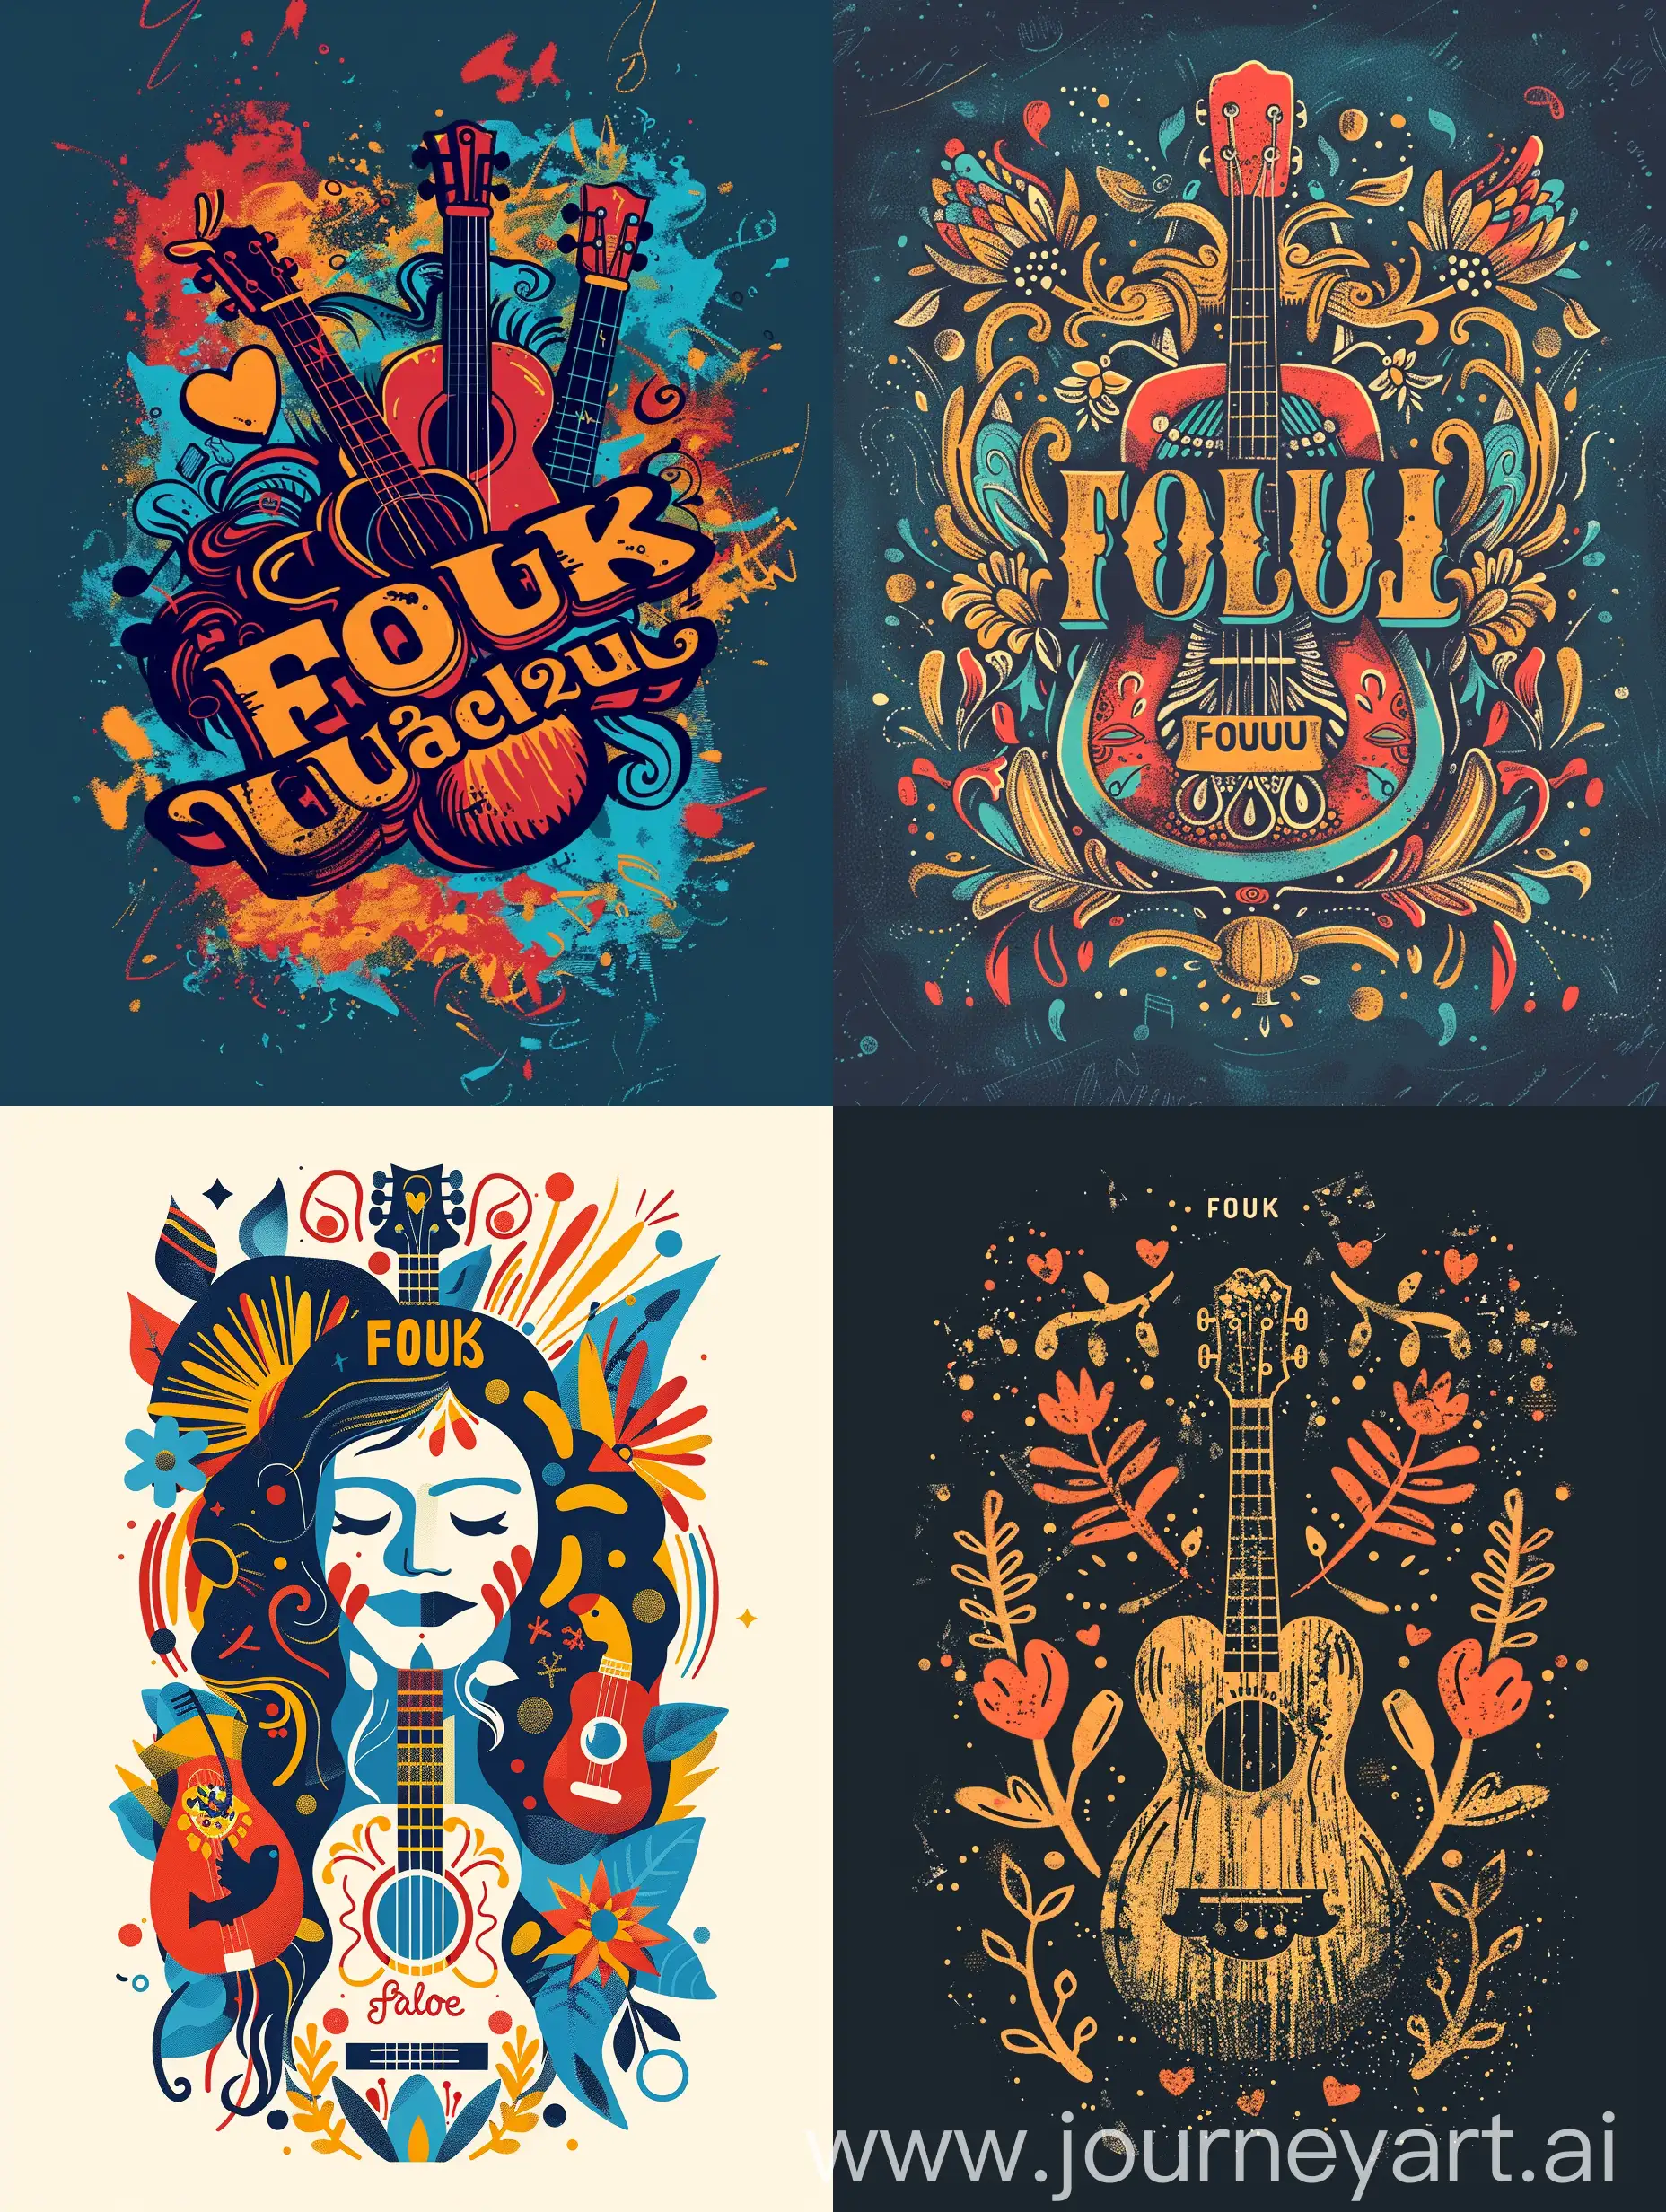 Create a captivating t-shirt design featuring the phrase "FOLK Guitare et Ukulélé" as the focal point. Incorporate elements that reflect music, love, and peace. Consider using bold typography, vibrant colors, and symbolic imagery to convey the message effectively.